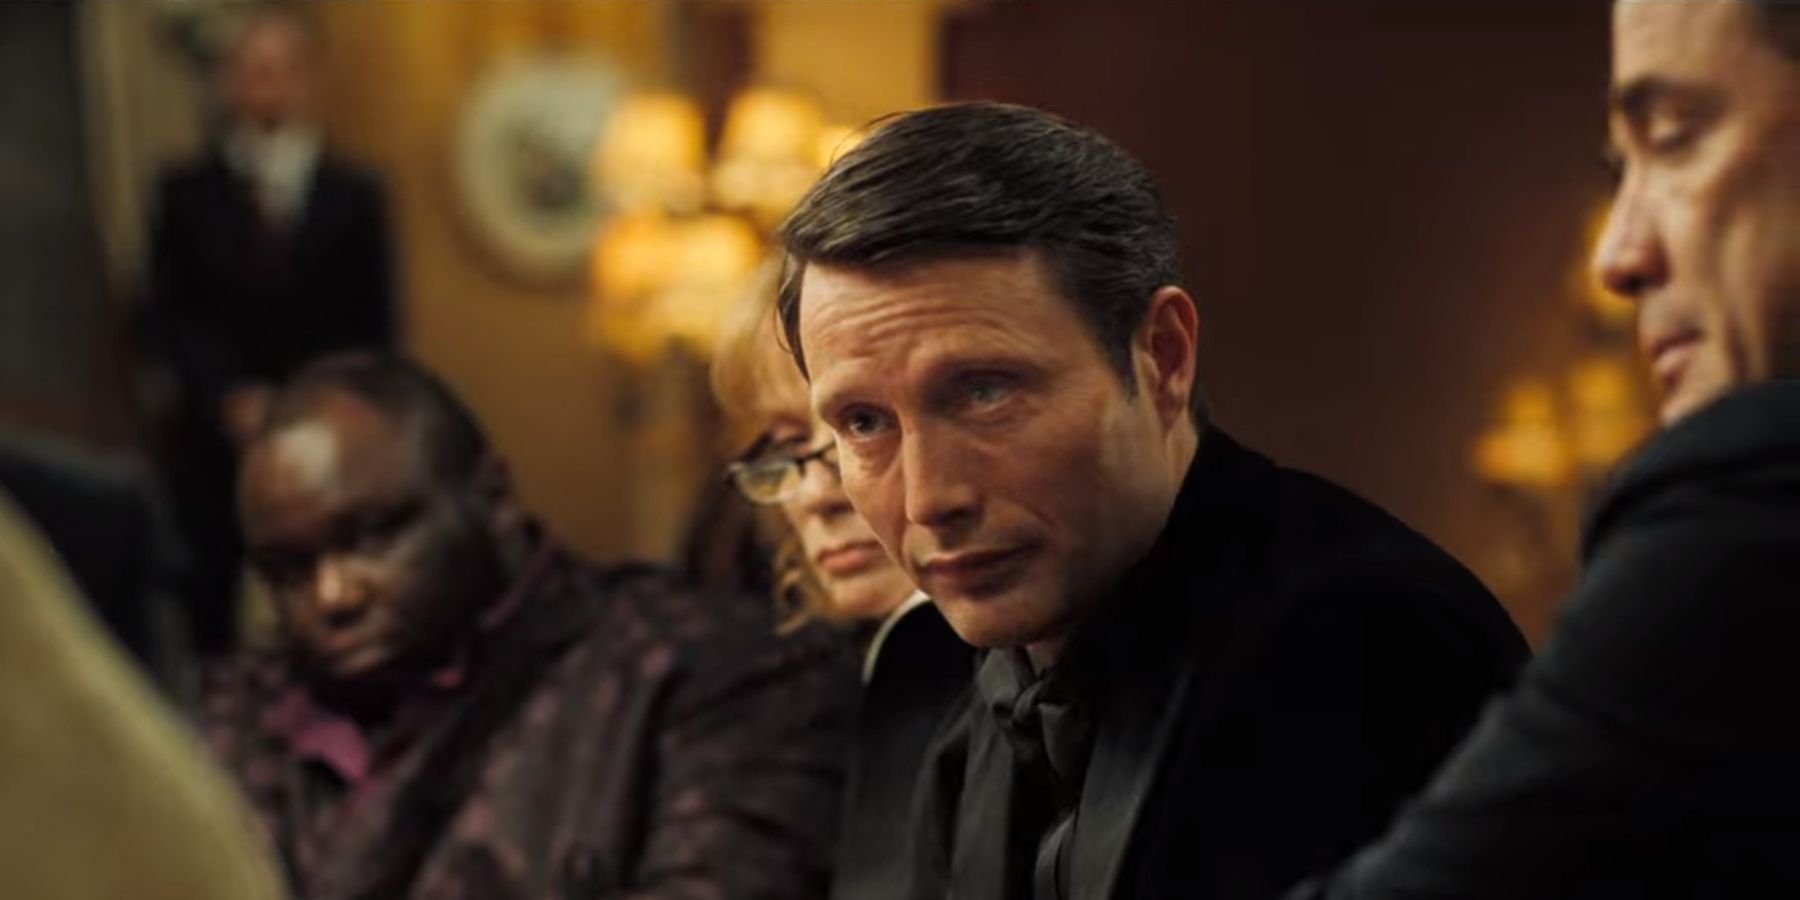 Le Chiffre at the poker table looking annoyed in Casino Royale